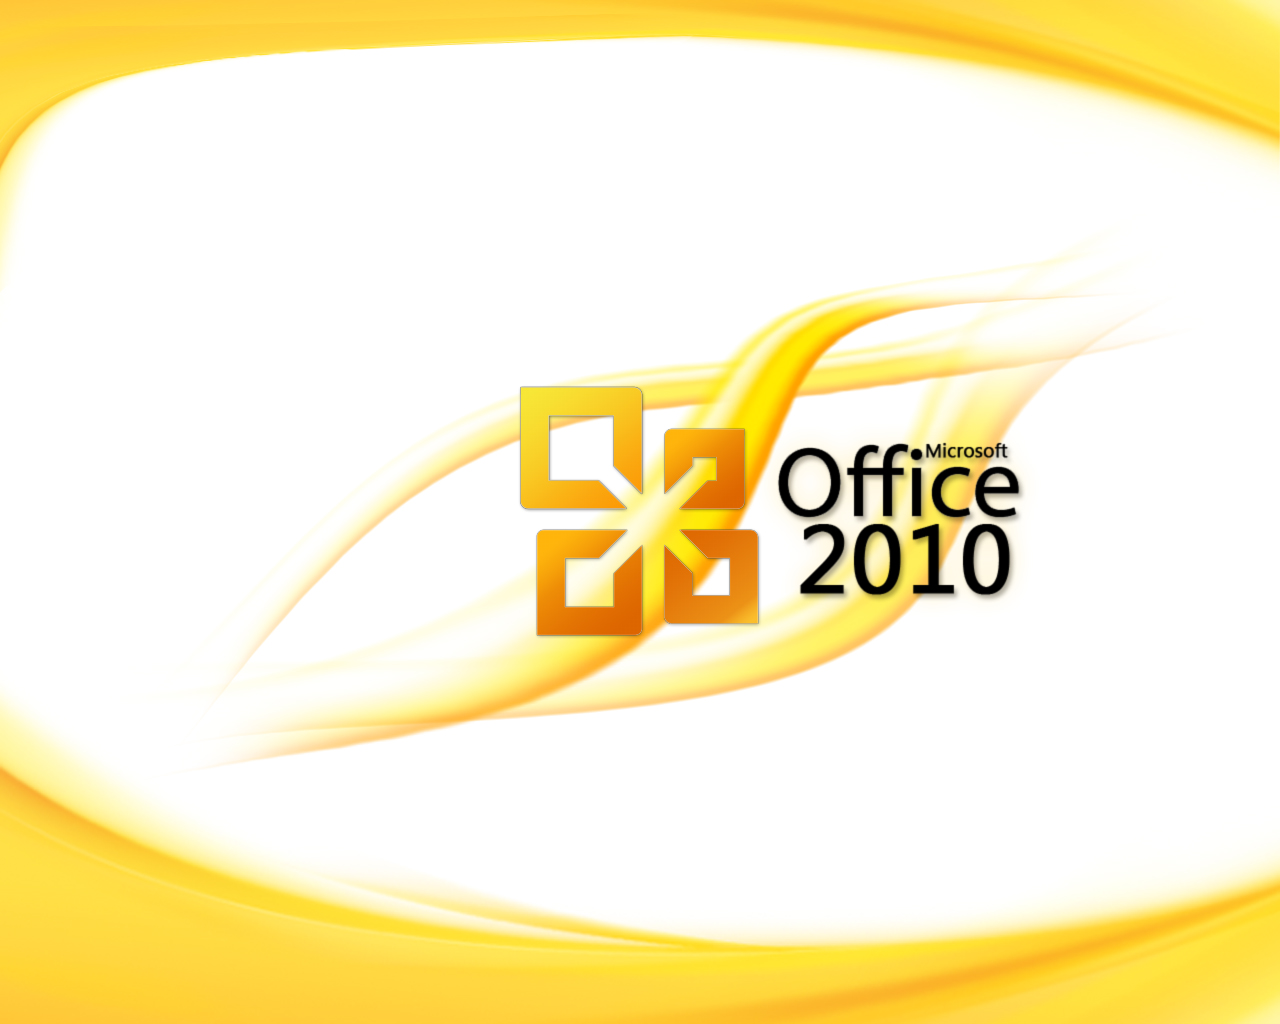 ms office 2010 torrent download with crack